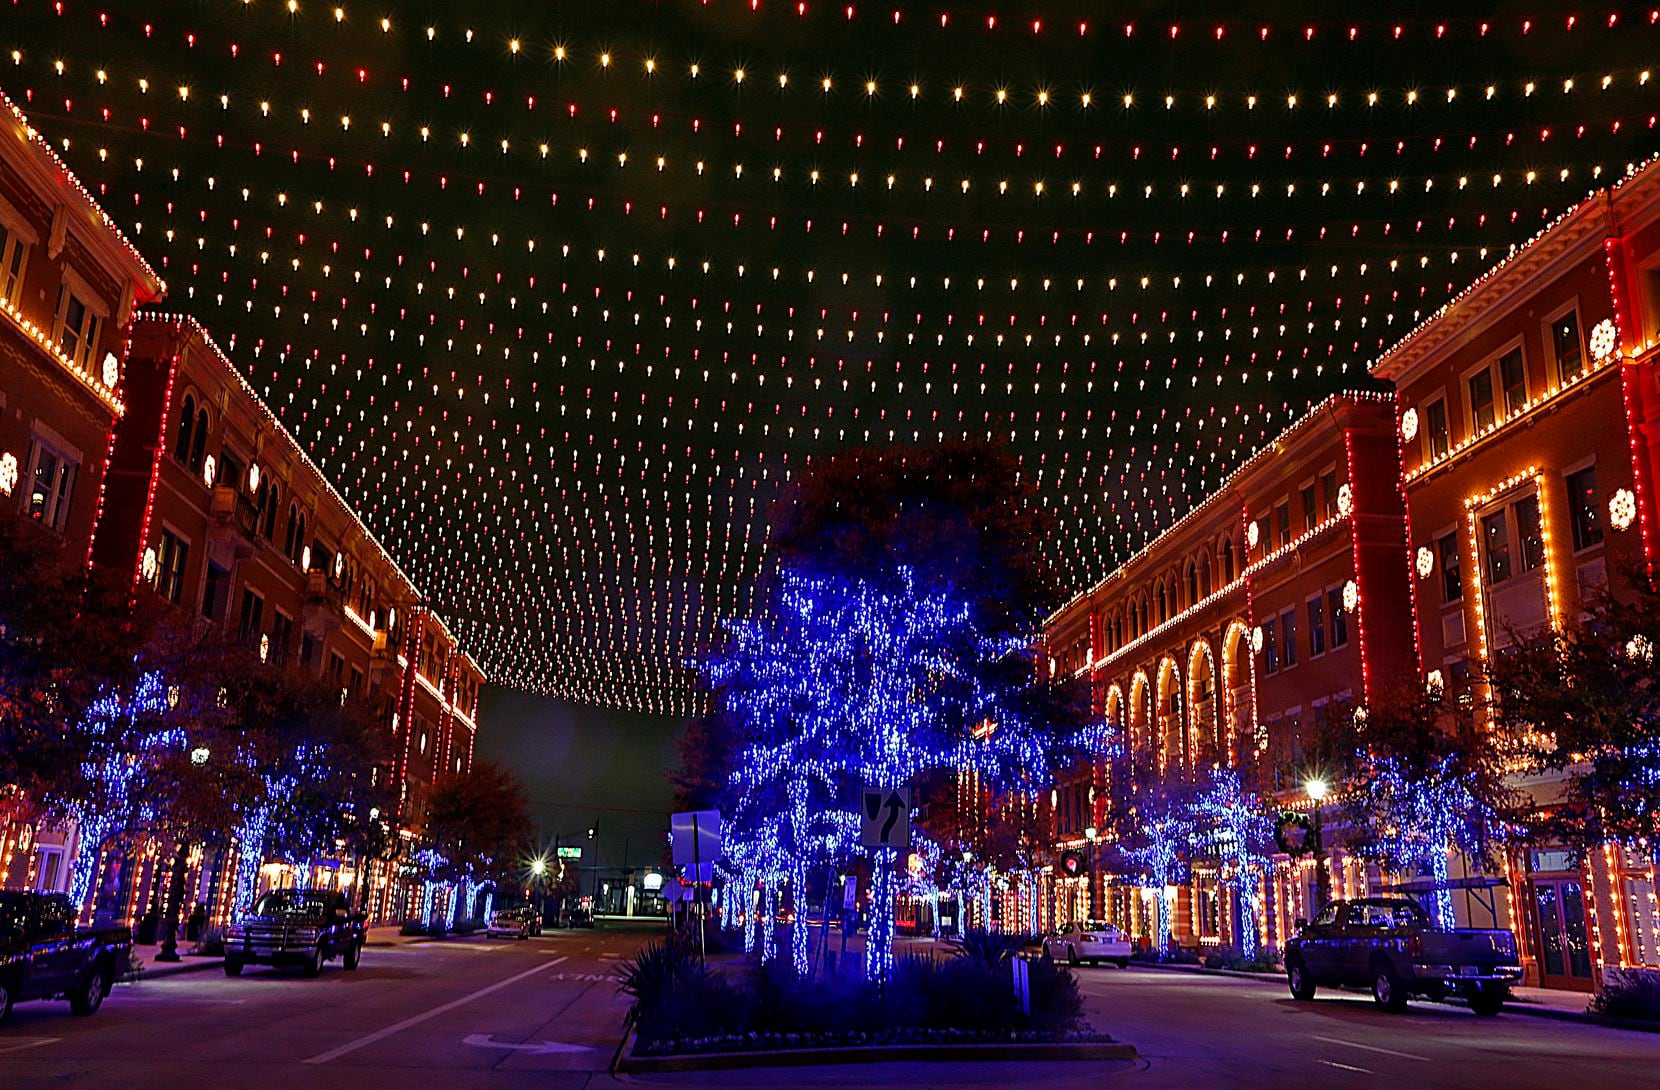 Jeff Trykoski is the mastermind behind the annual holiday light show at Frisco Square which is synchronized to music. He tested the system on Monday night, Nov. 25, 2013.